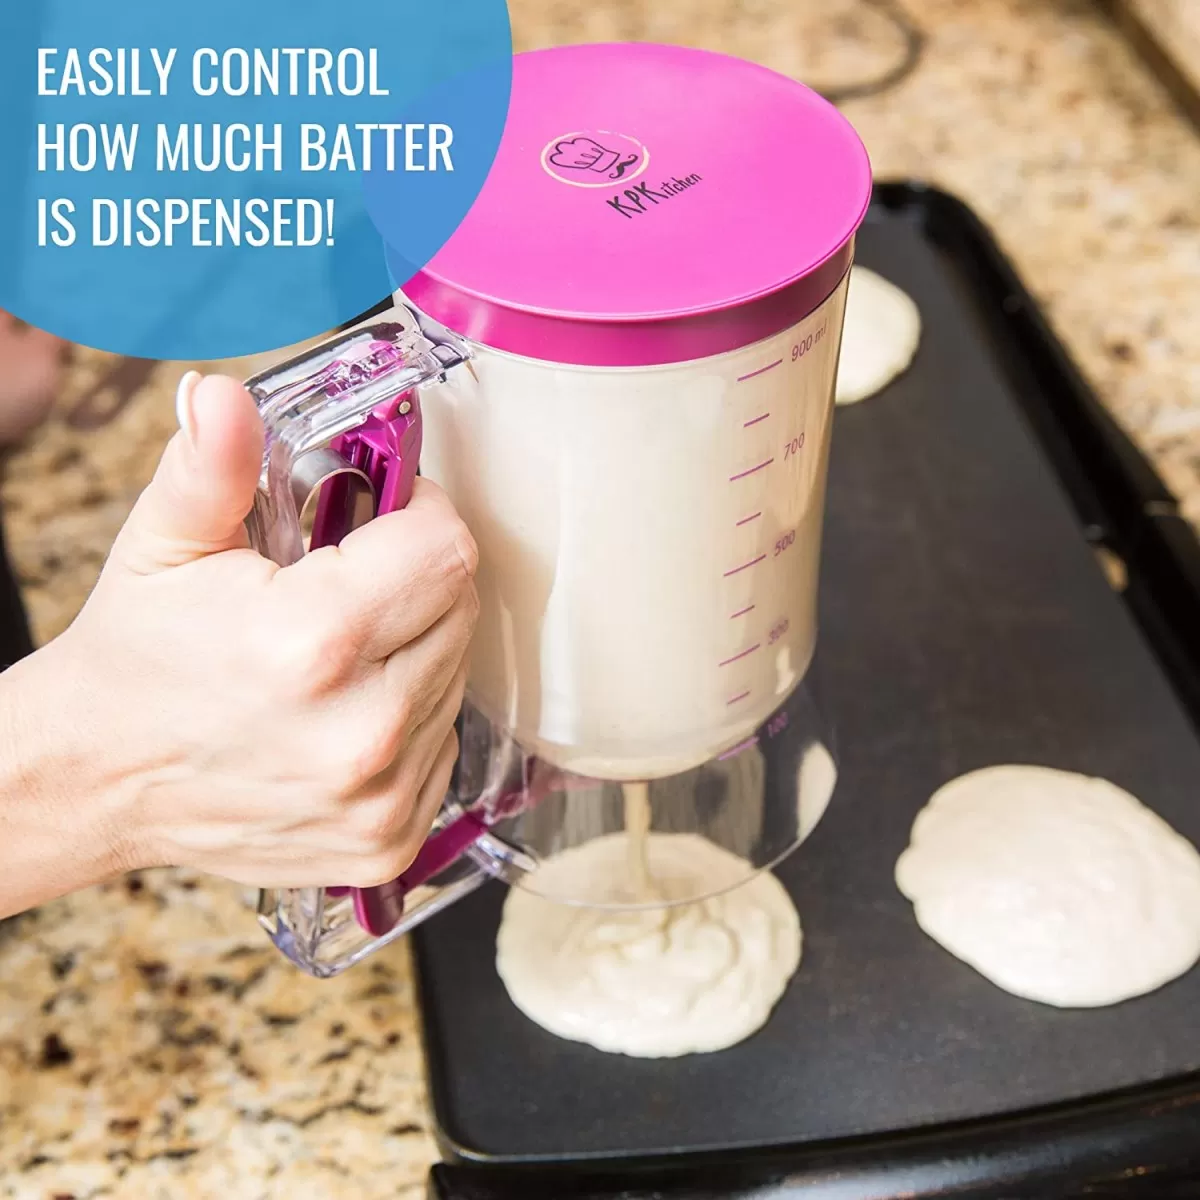 Pancake Batter Dispenser Perfect Baking Tool for Cupcake, Waffles, Muffin Mix, Cake or Any Baked Goods Bakeware Maker with Measuring Label